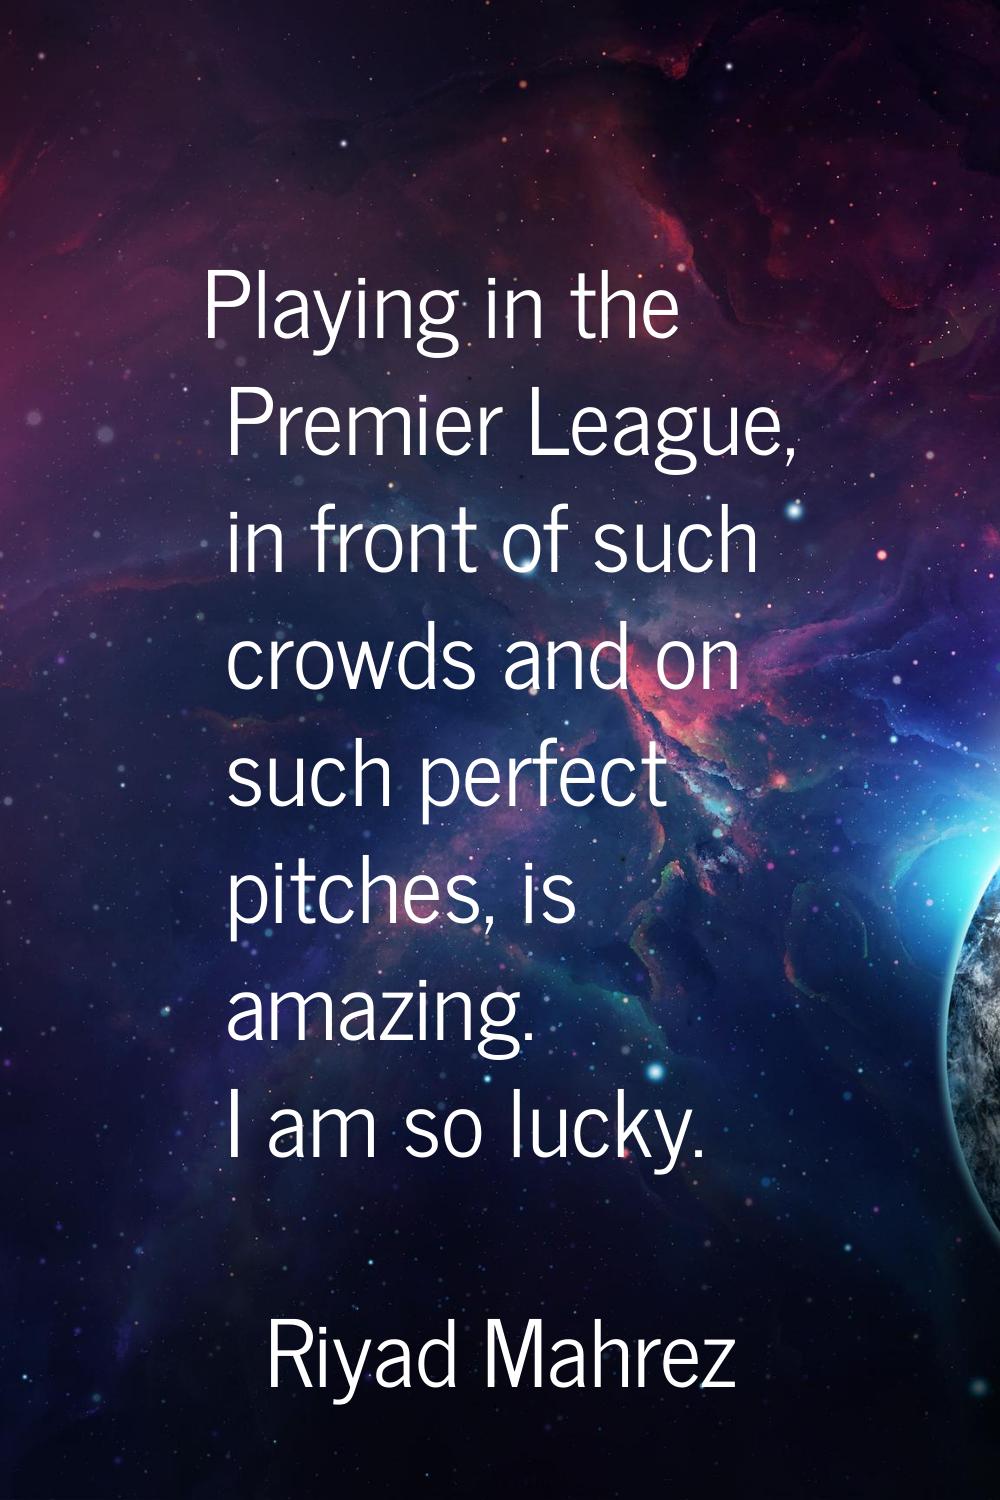 Playing in the Premier League, in front of such crowds and on such perfect pitches, is amazing. I a